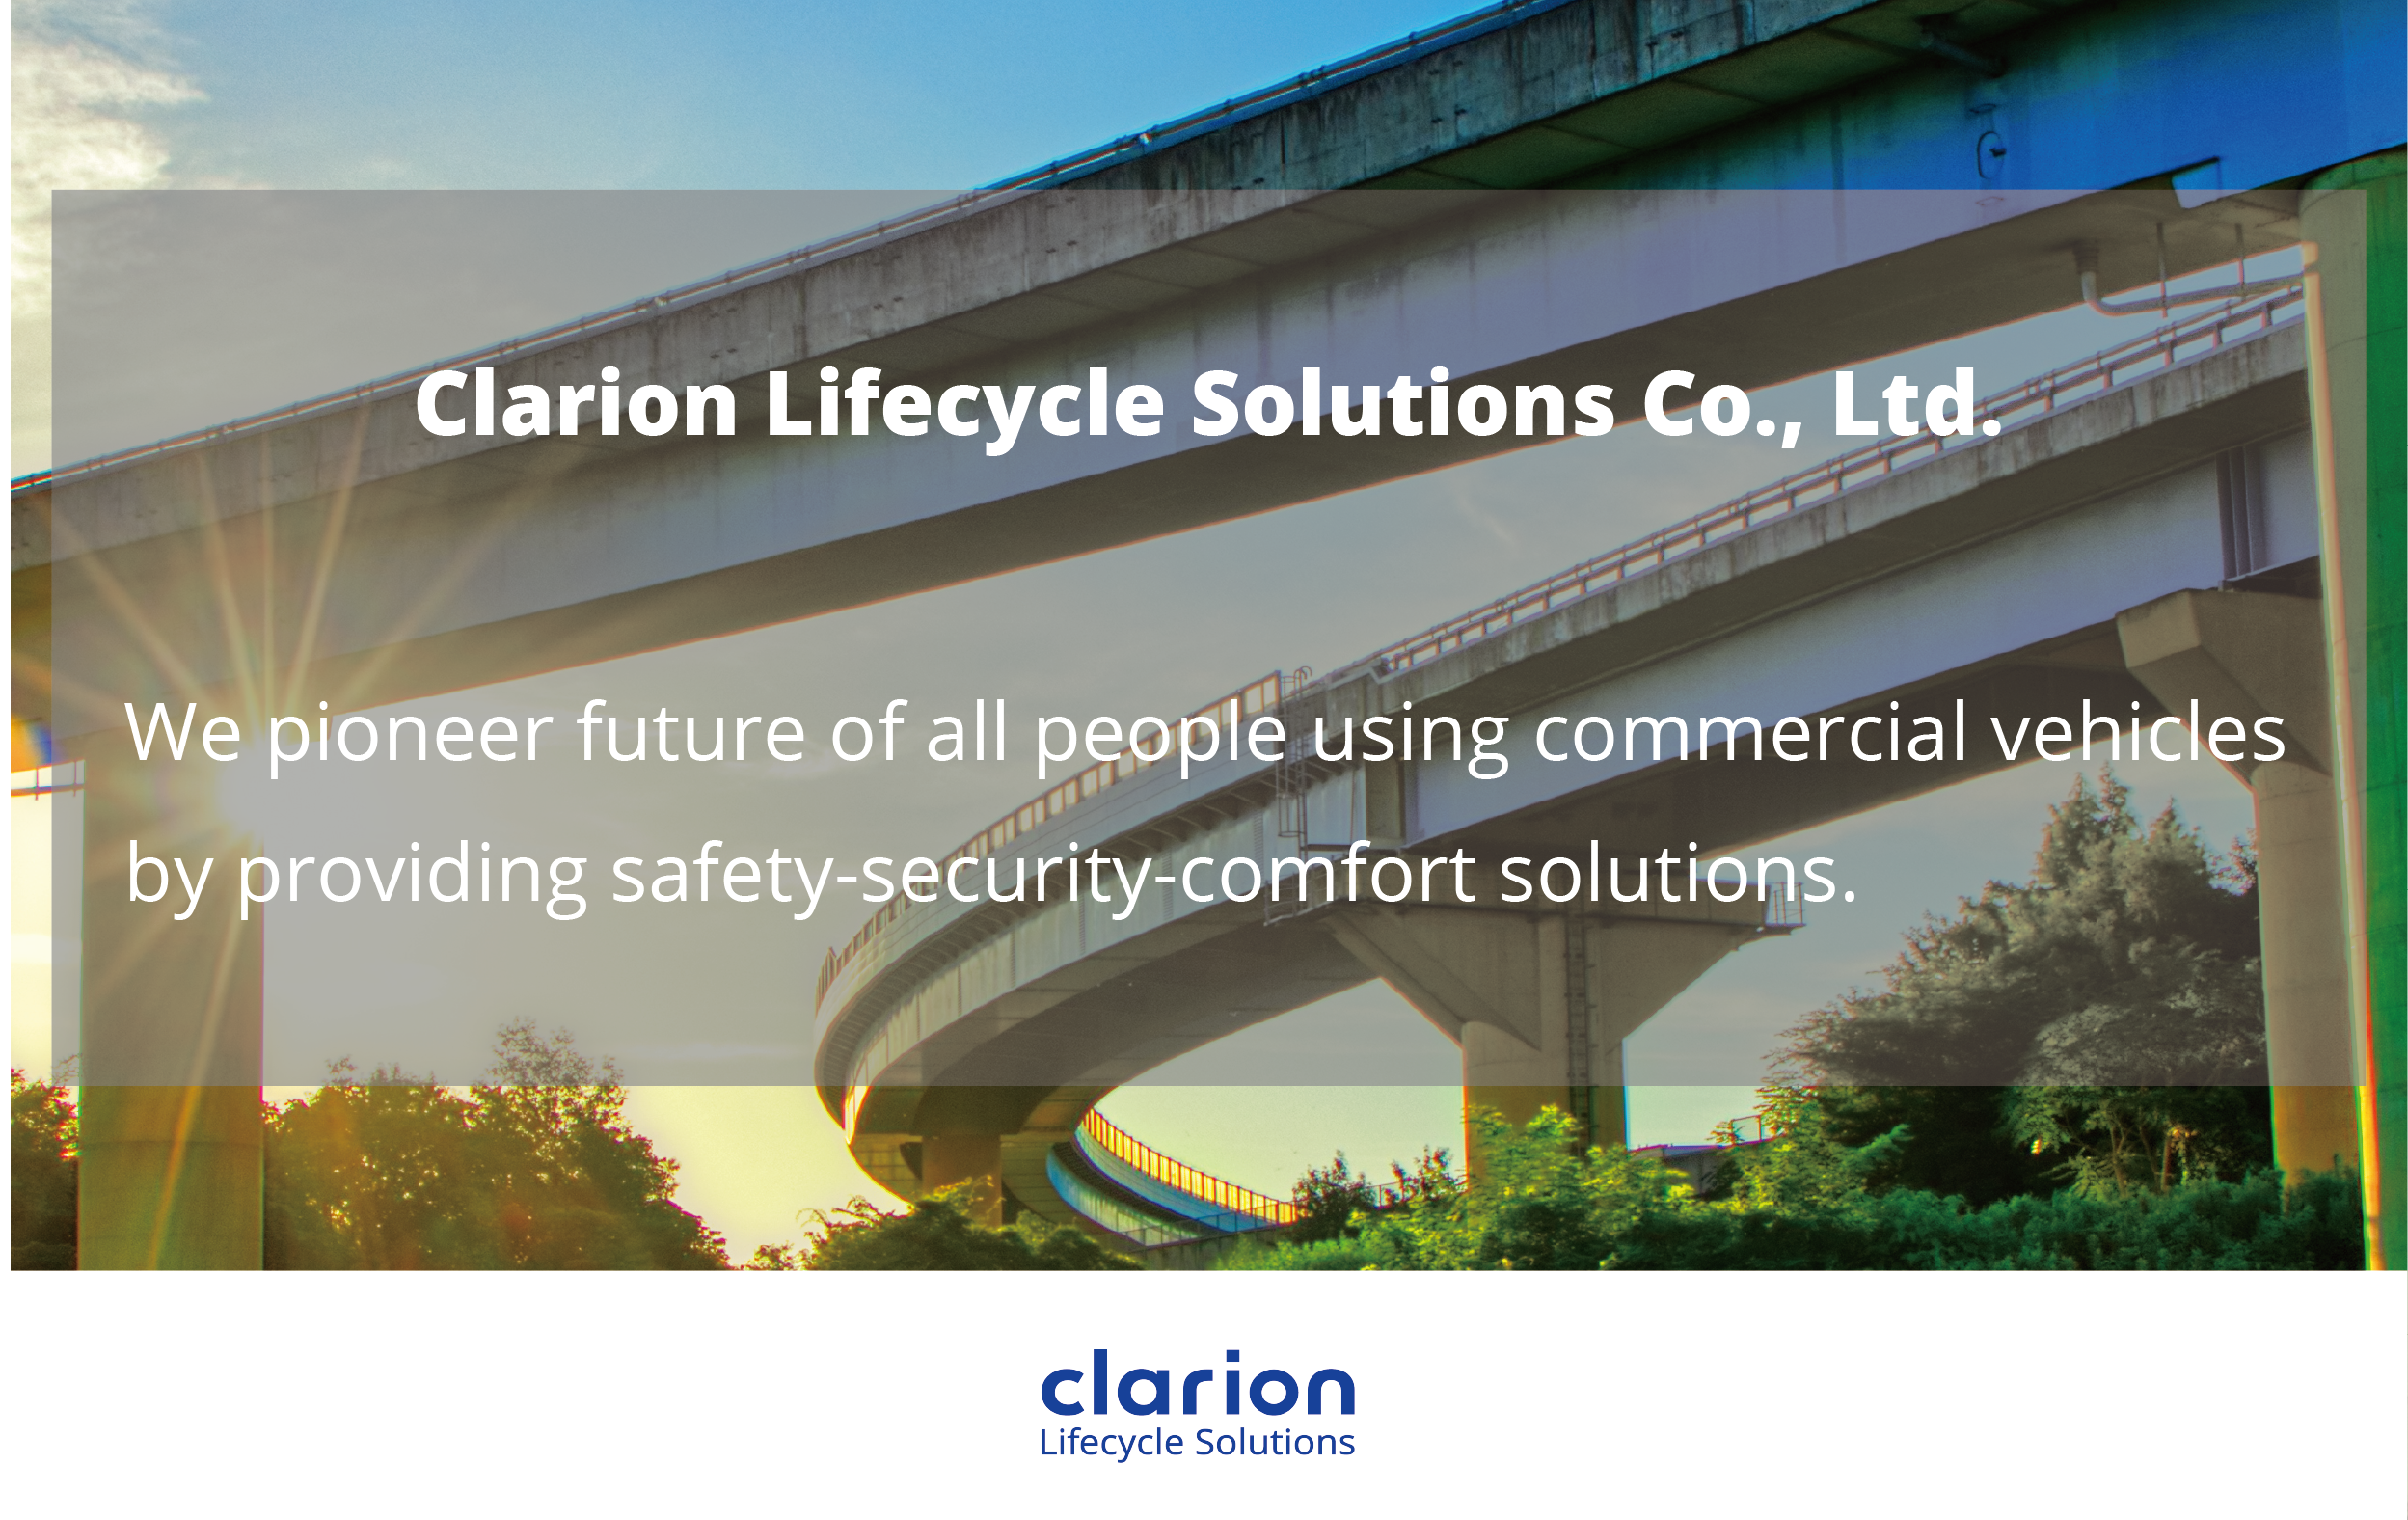 Clarion Lifecycle Solutions